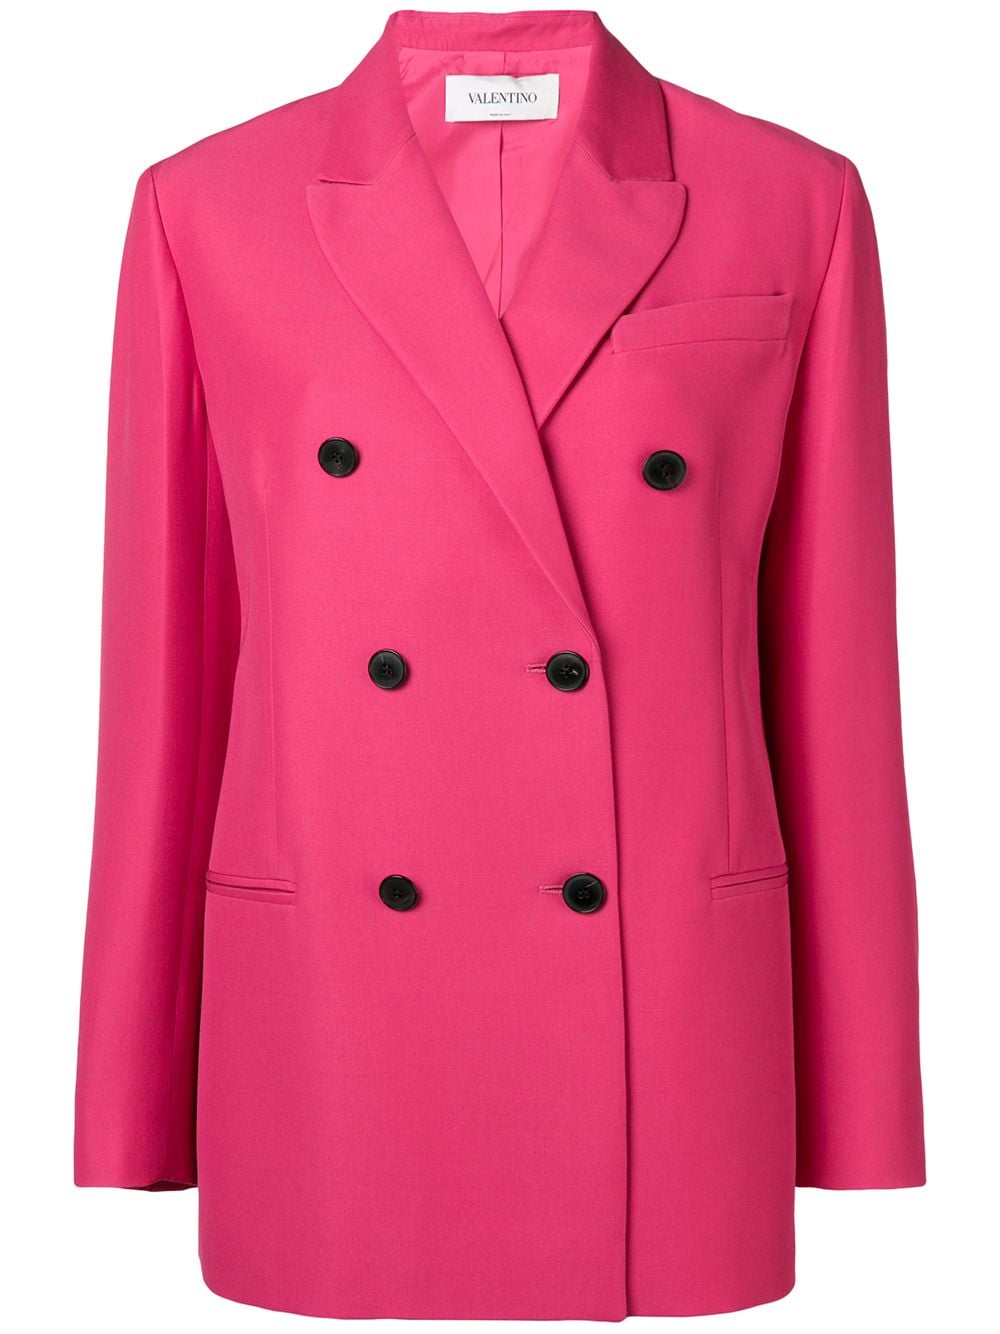 Shop Valentino double breasted tailored blazer with Express Delivery ...